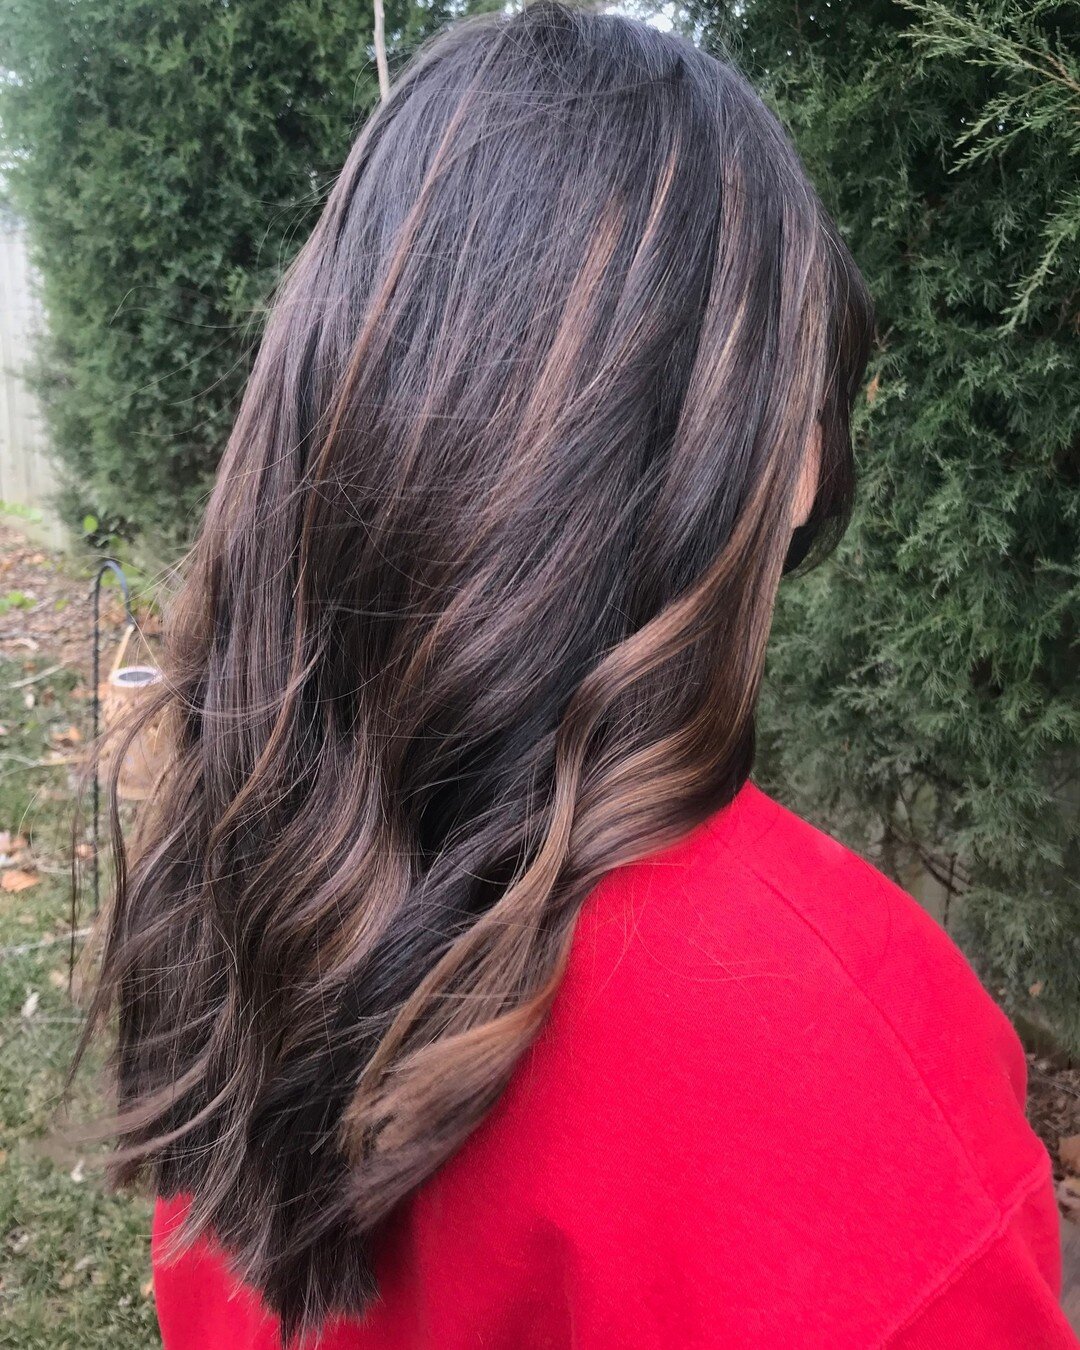 I want #fabulous. That is my simple request - #DONE!

Maybe you don't know what you need, book a consultation to find your fabulous! #evolvesalonlincoln 

Hair Stylist: @macis_chair